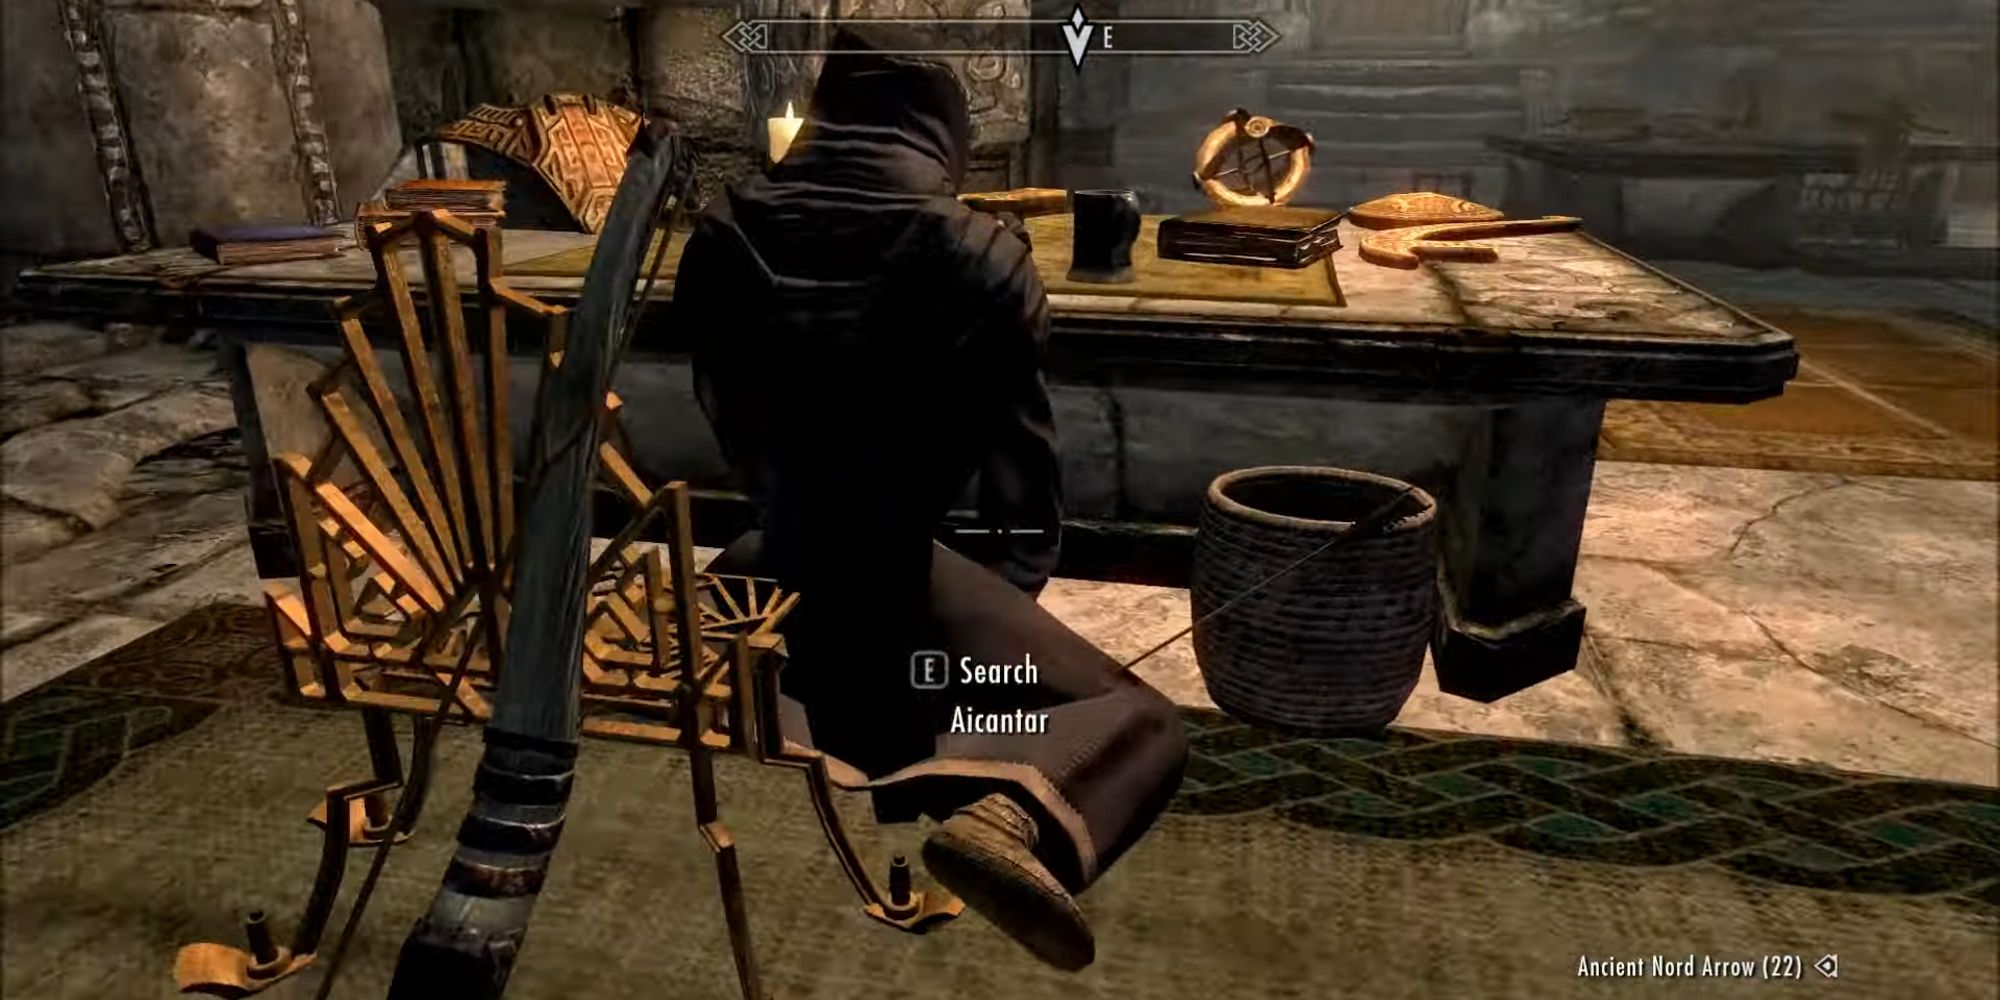 player looking at aicanter, dead at his study table